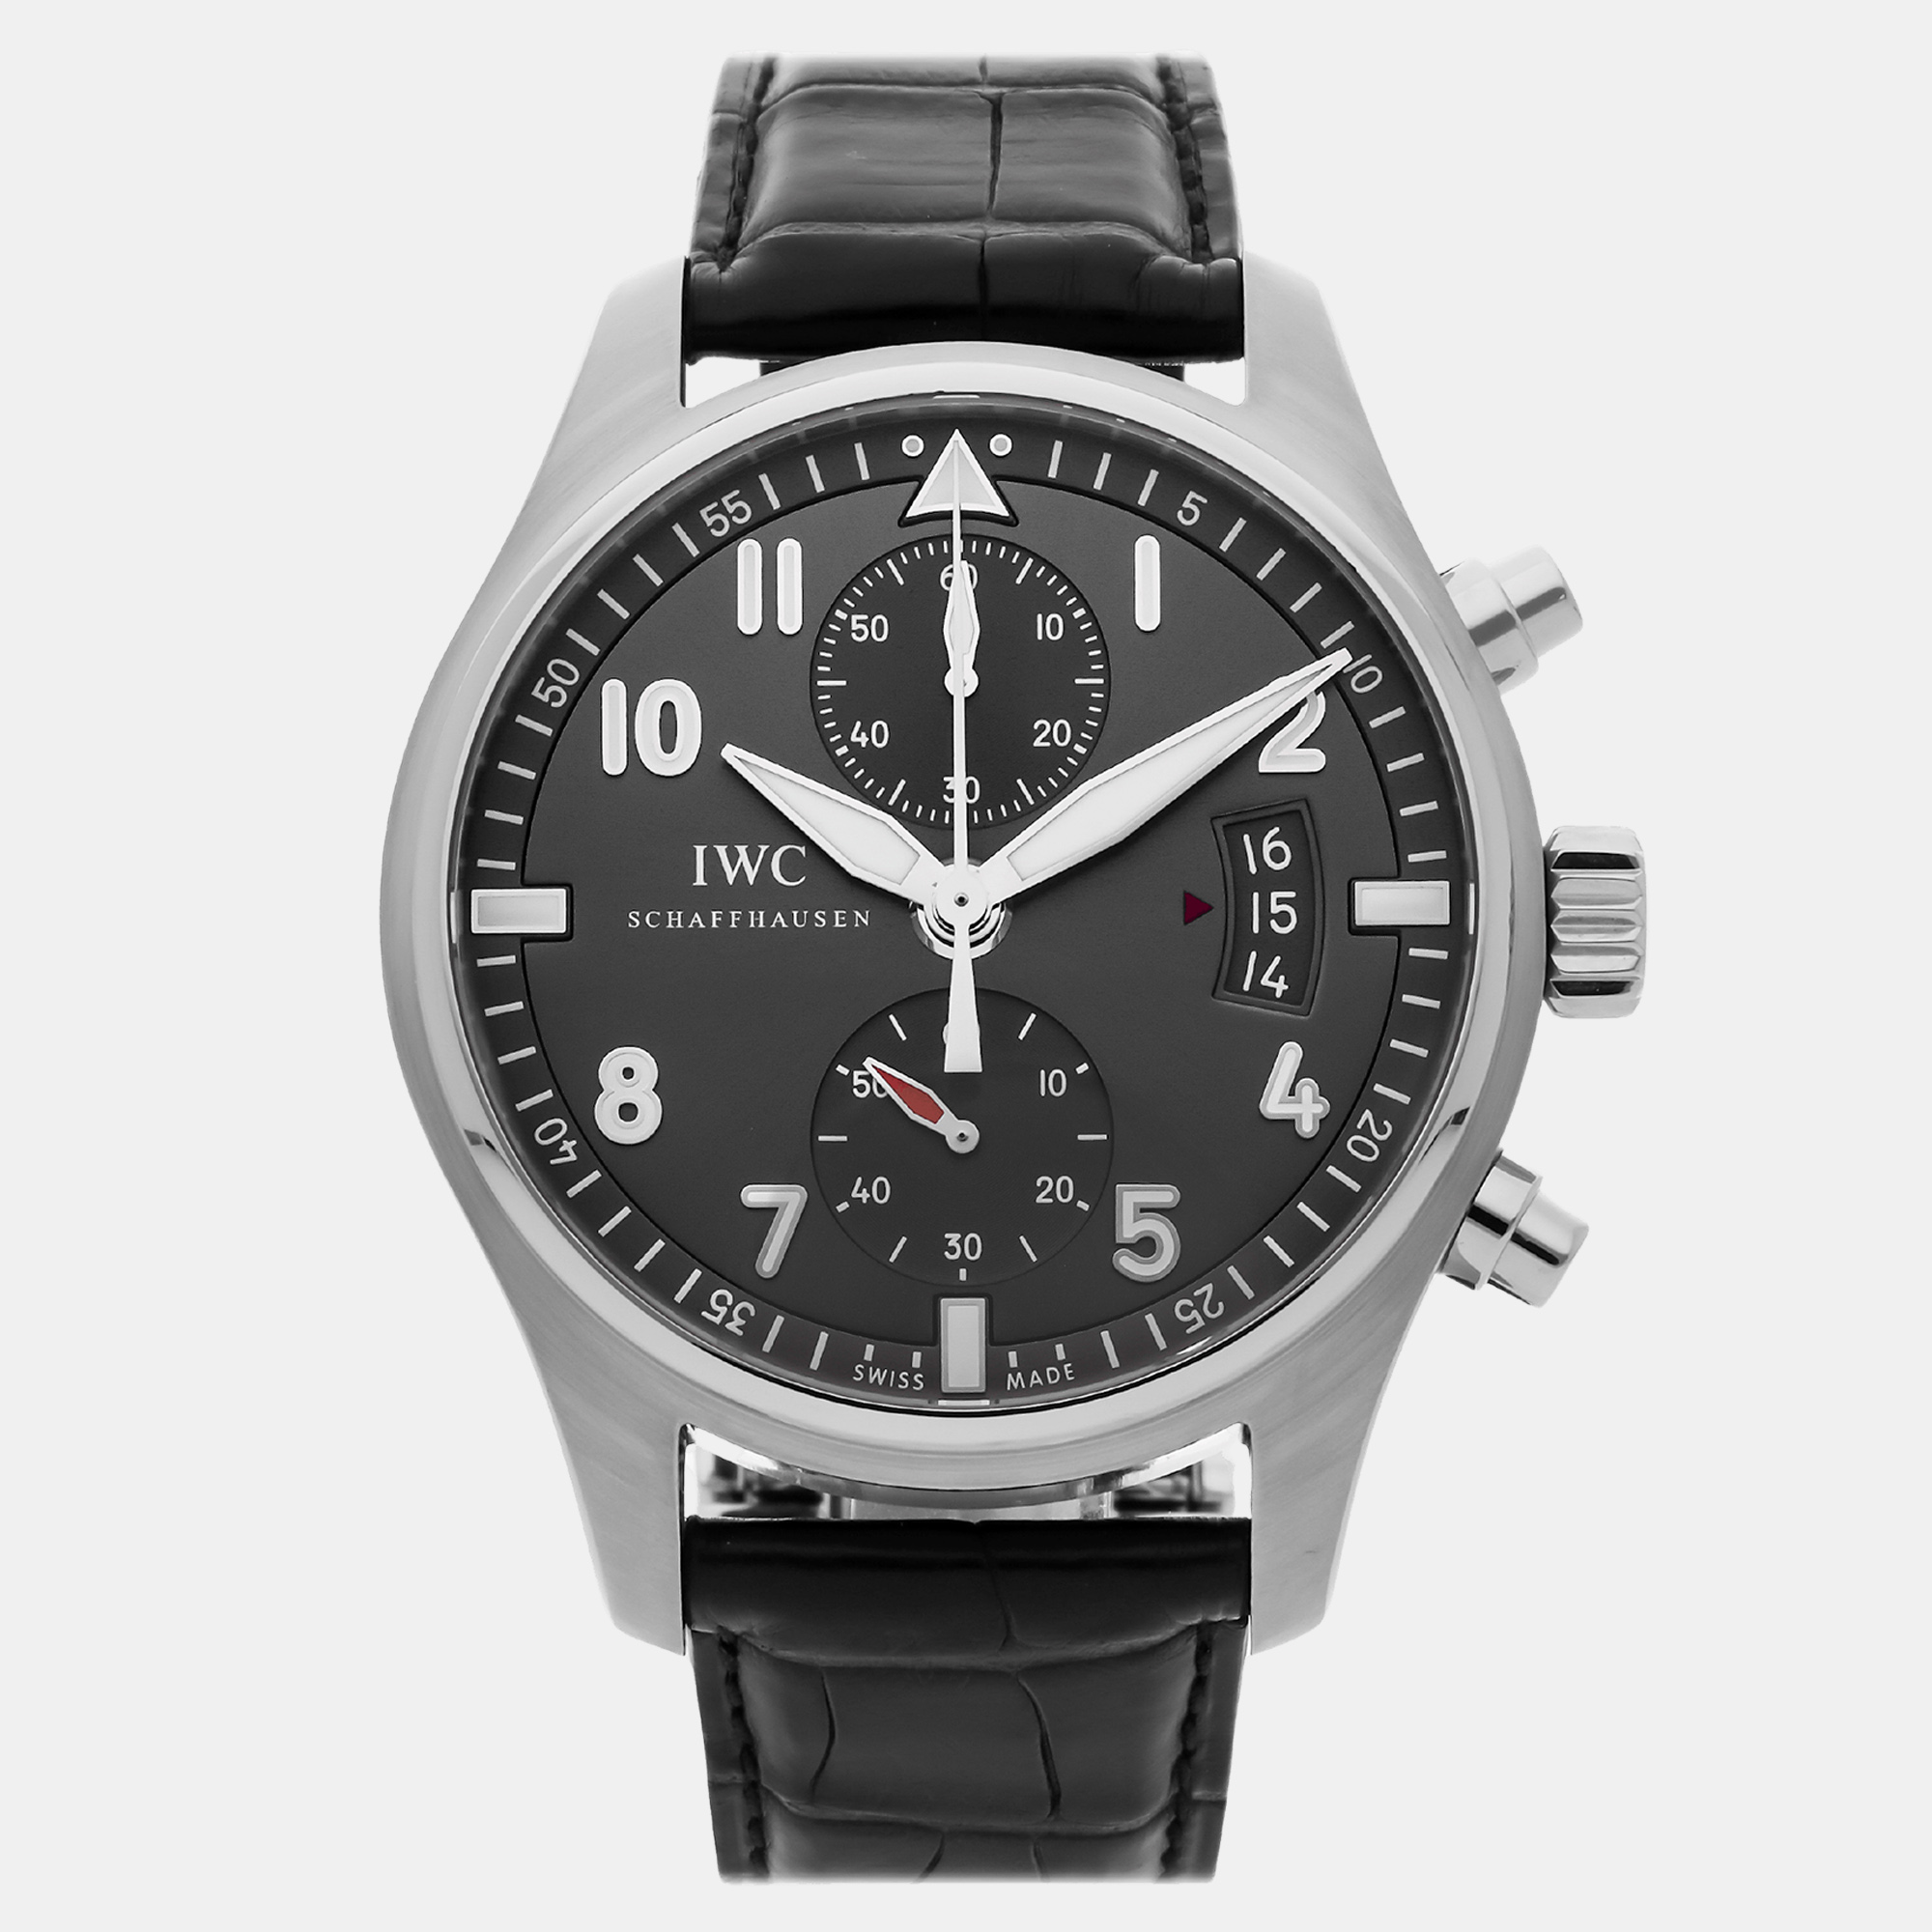 Iwc grey stainless steel pilot's iw3878-02 automatic men's wristwatch 43 mm